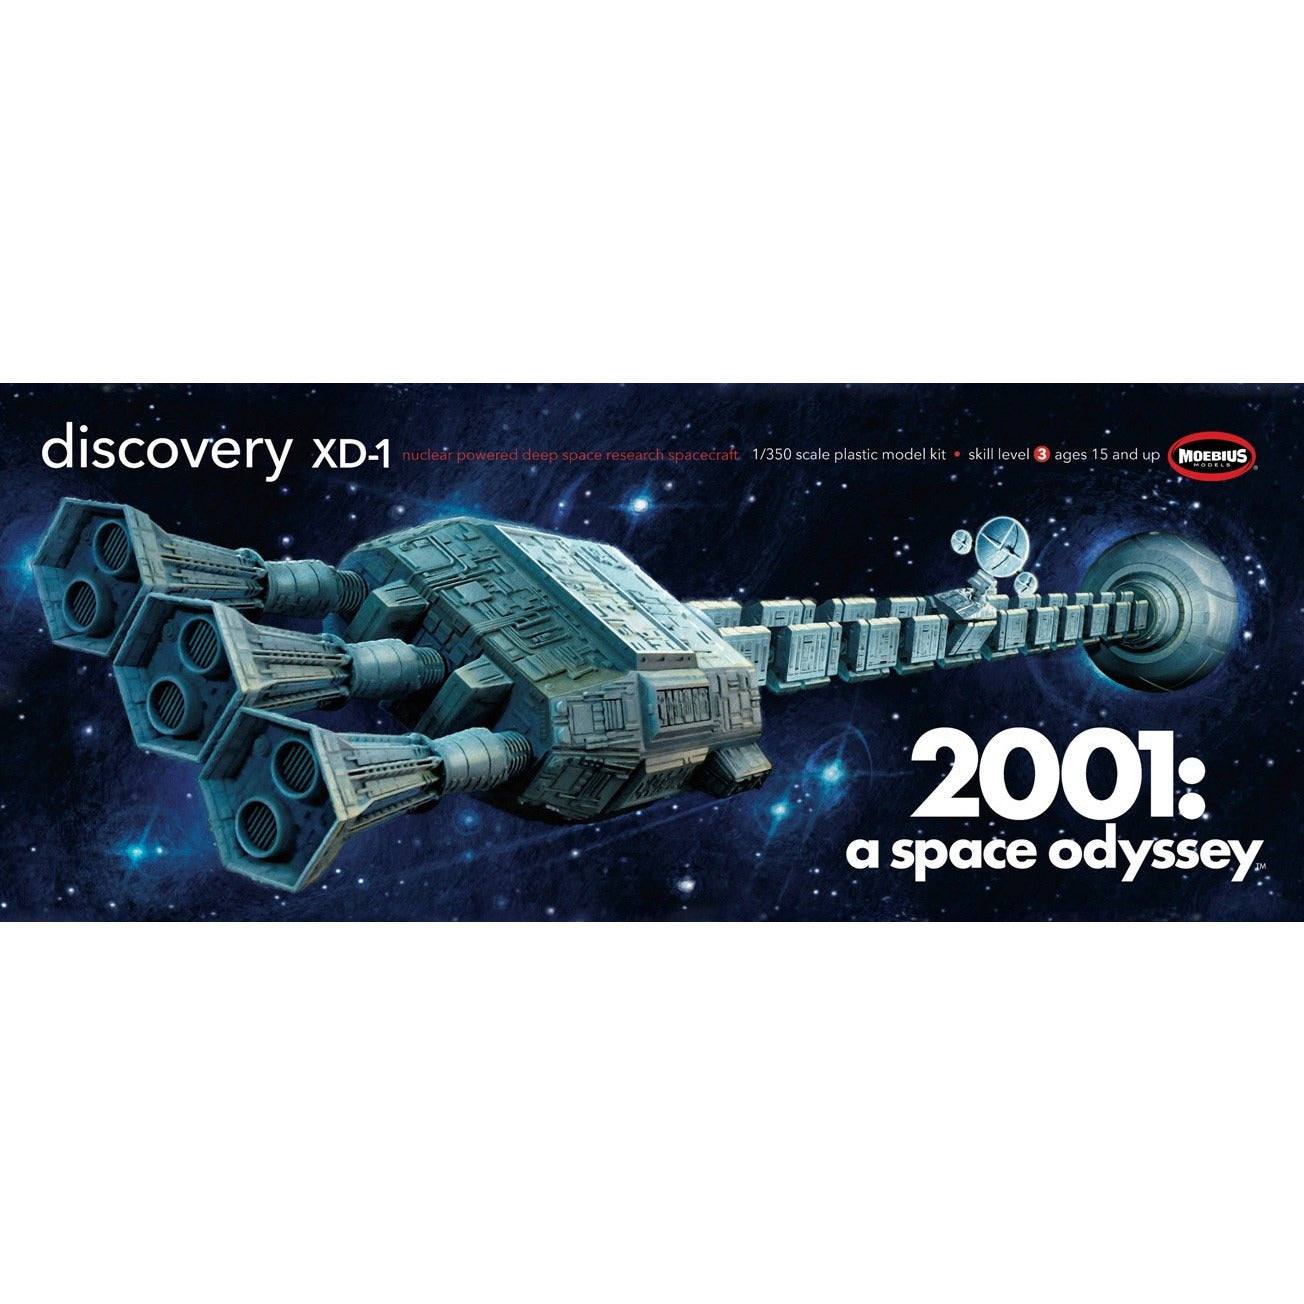 Discovery XD-1 1/350 2001: A Space Odyssey #630-2001-8 by Moebius